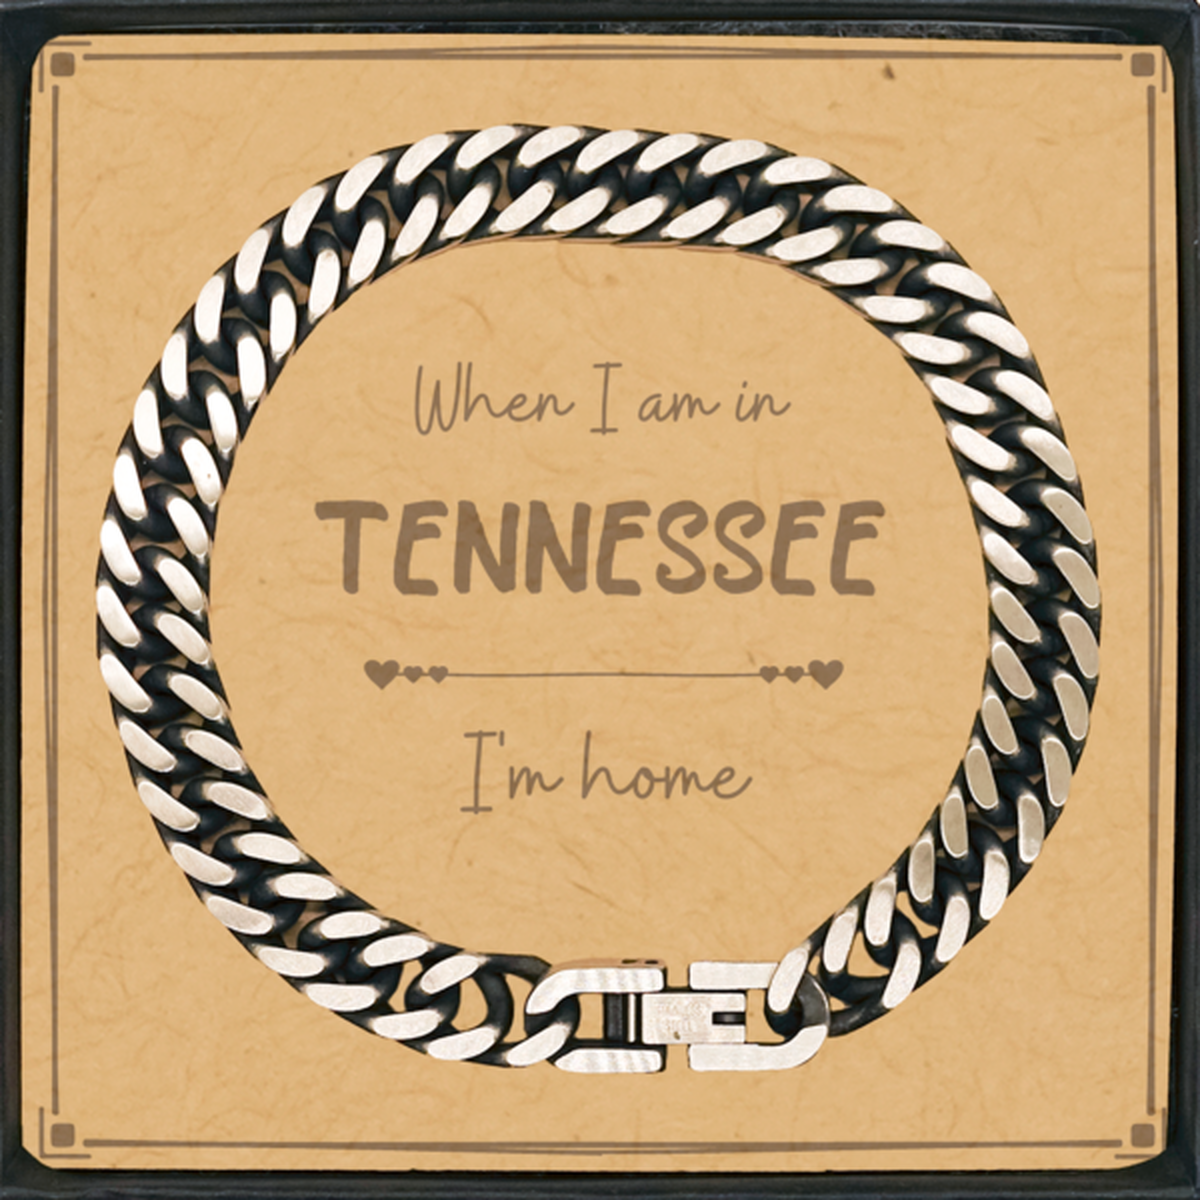 When I am in Tennessee I'm home Cuban Link Chain Bracelet, Message Card Gifts For Tennessee, State Tennessee Birthday Gifts for Friends Coworker